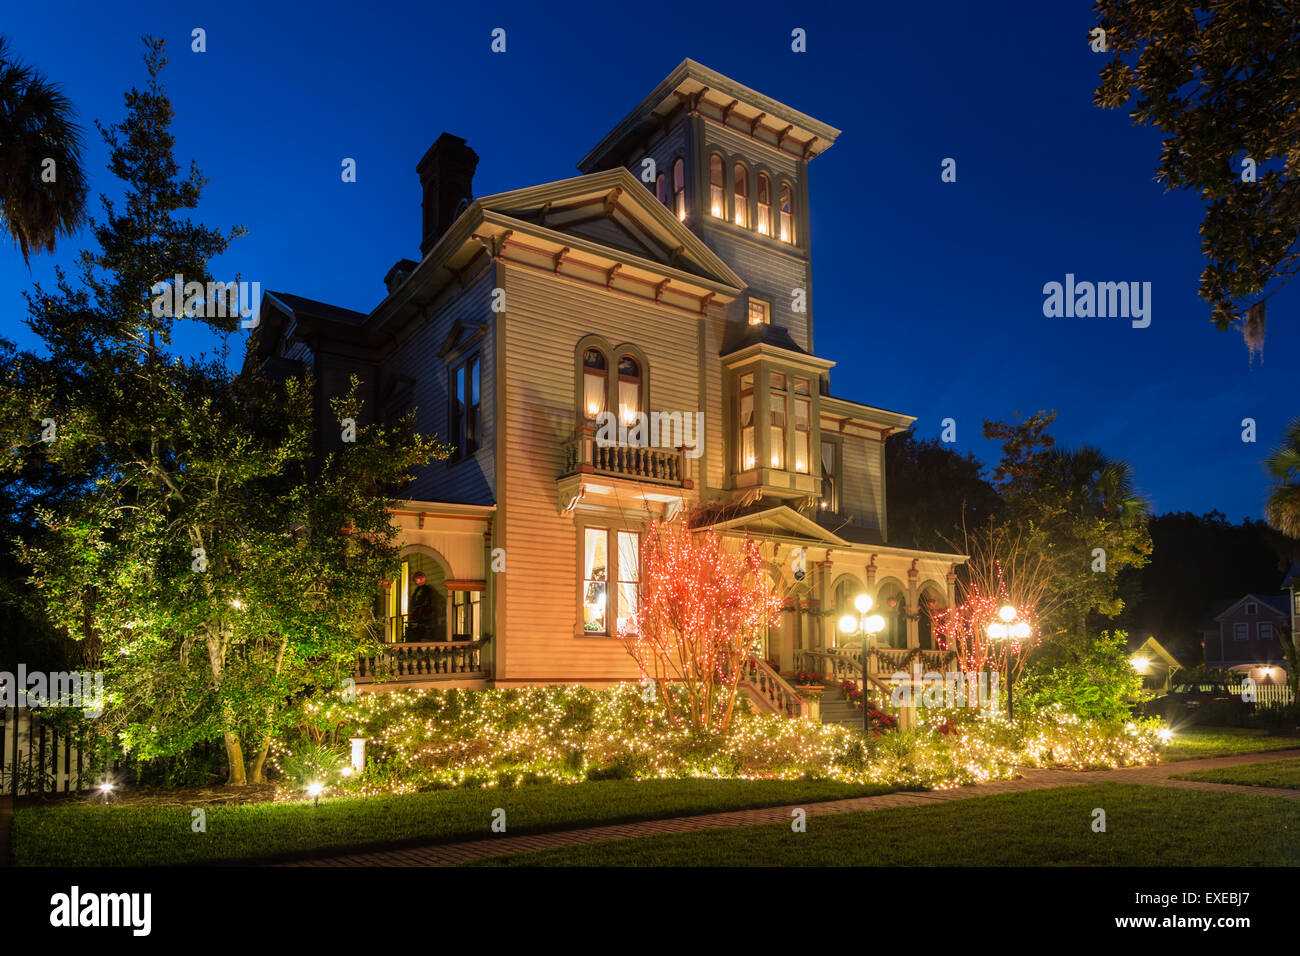 The Fairbanks House Bed and Breakfast decorated in Christmas lights, Amelia Island, Florida Stock Photo